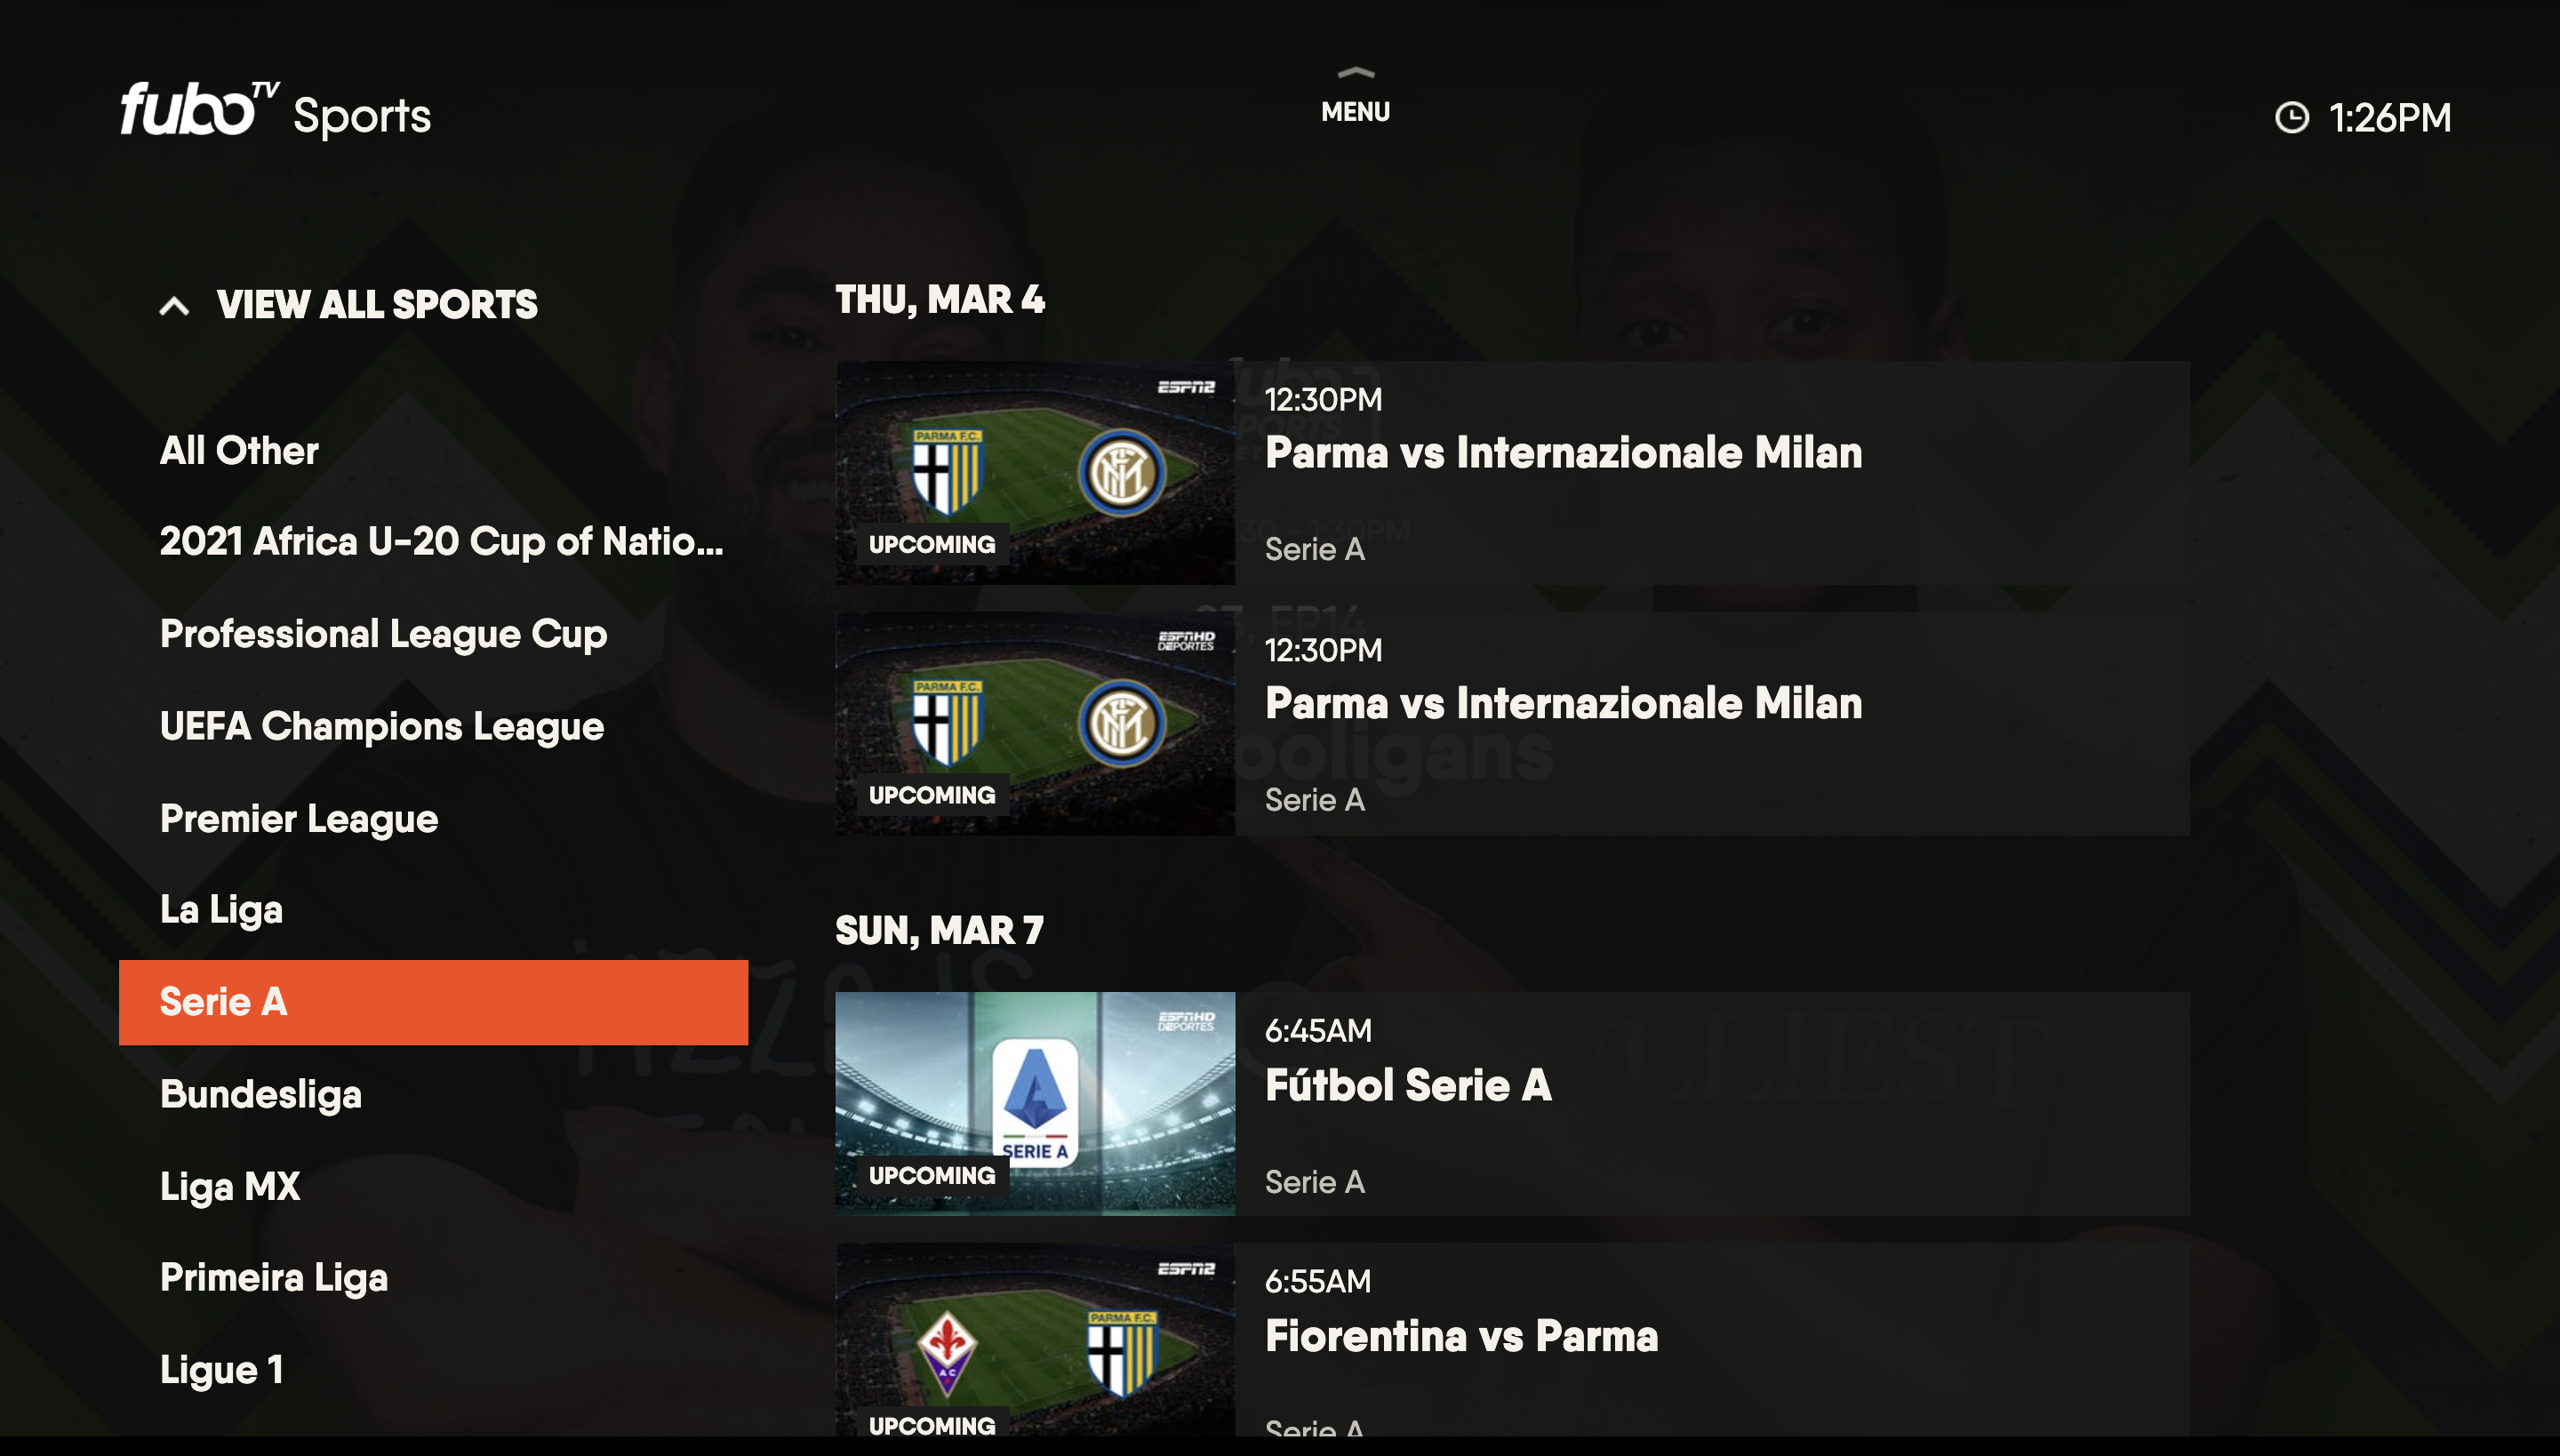 SPORTS screen of the FuboTV app on Samsung TV with individual sport filters highlighted